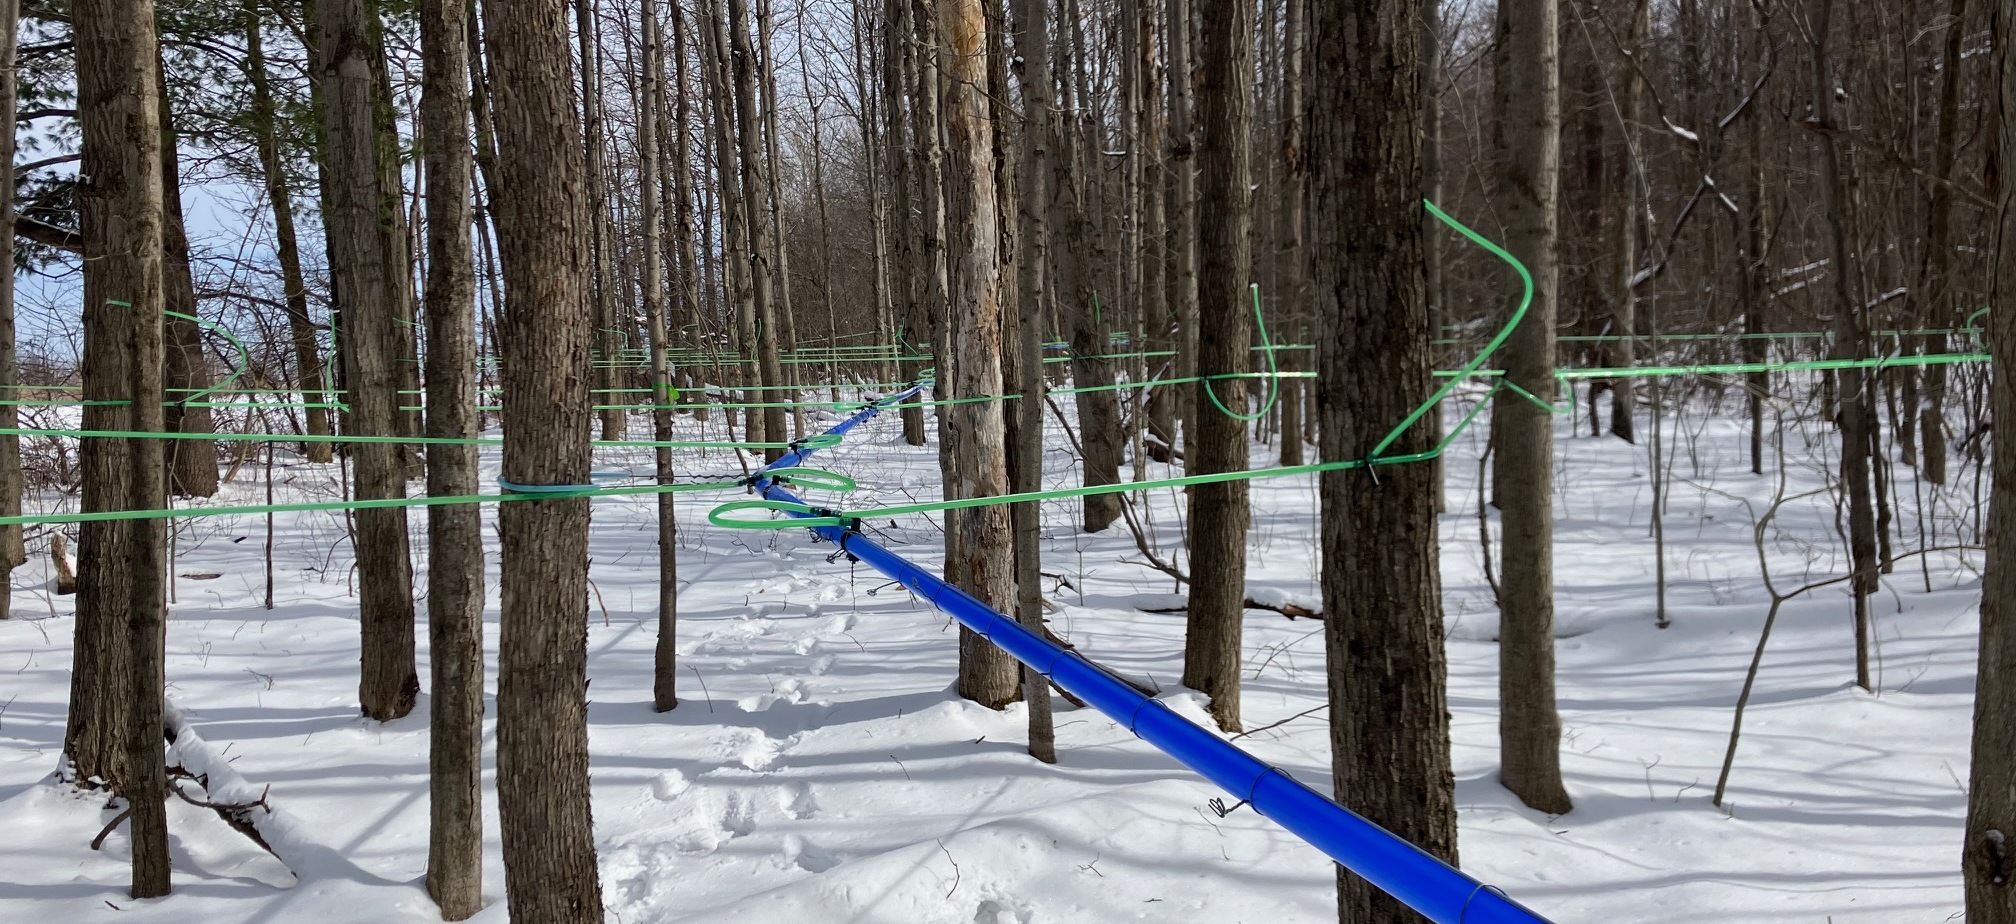 our process - tubing to collect maple syrup